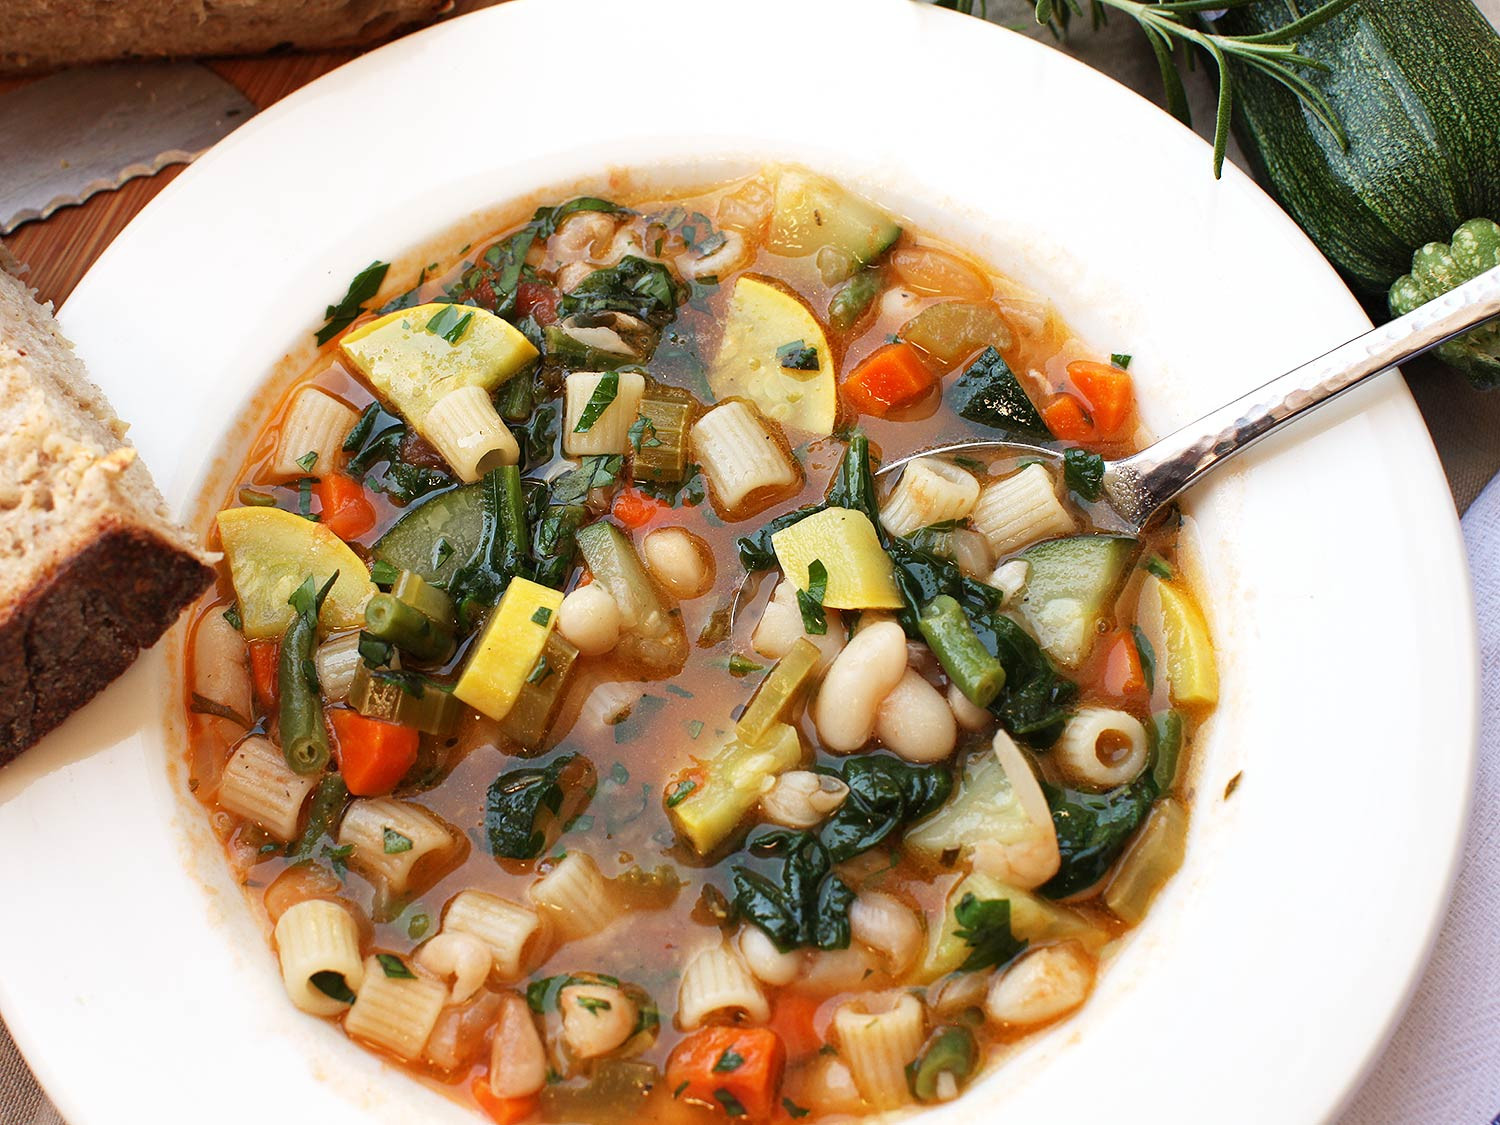 Best Vegetarian Soup Recipes
 16 Vegan Soup and Stew Recipes to Warm You Up